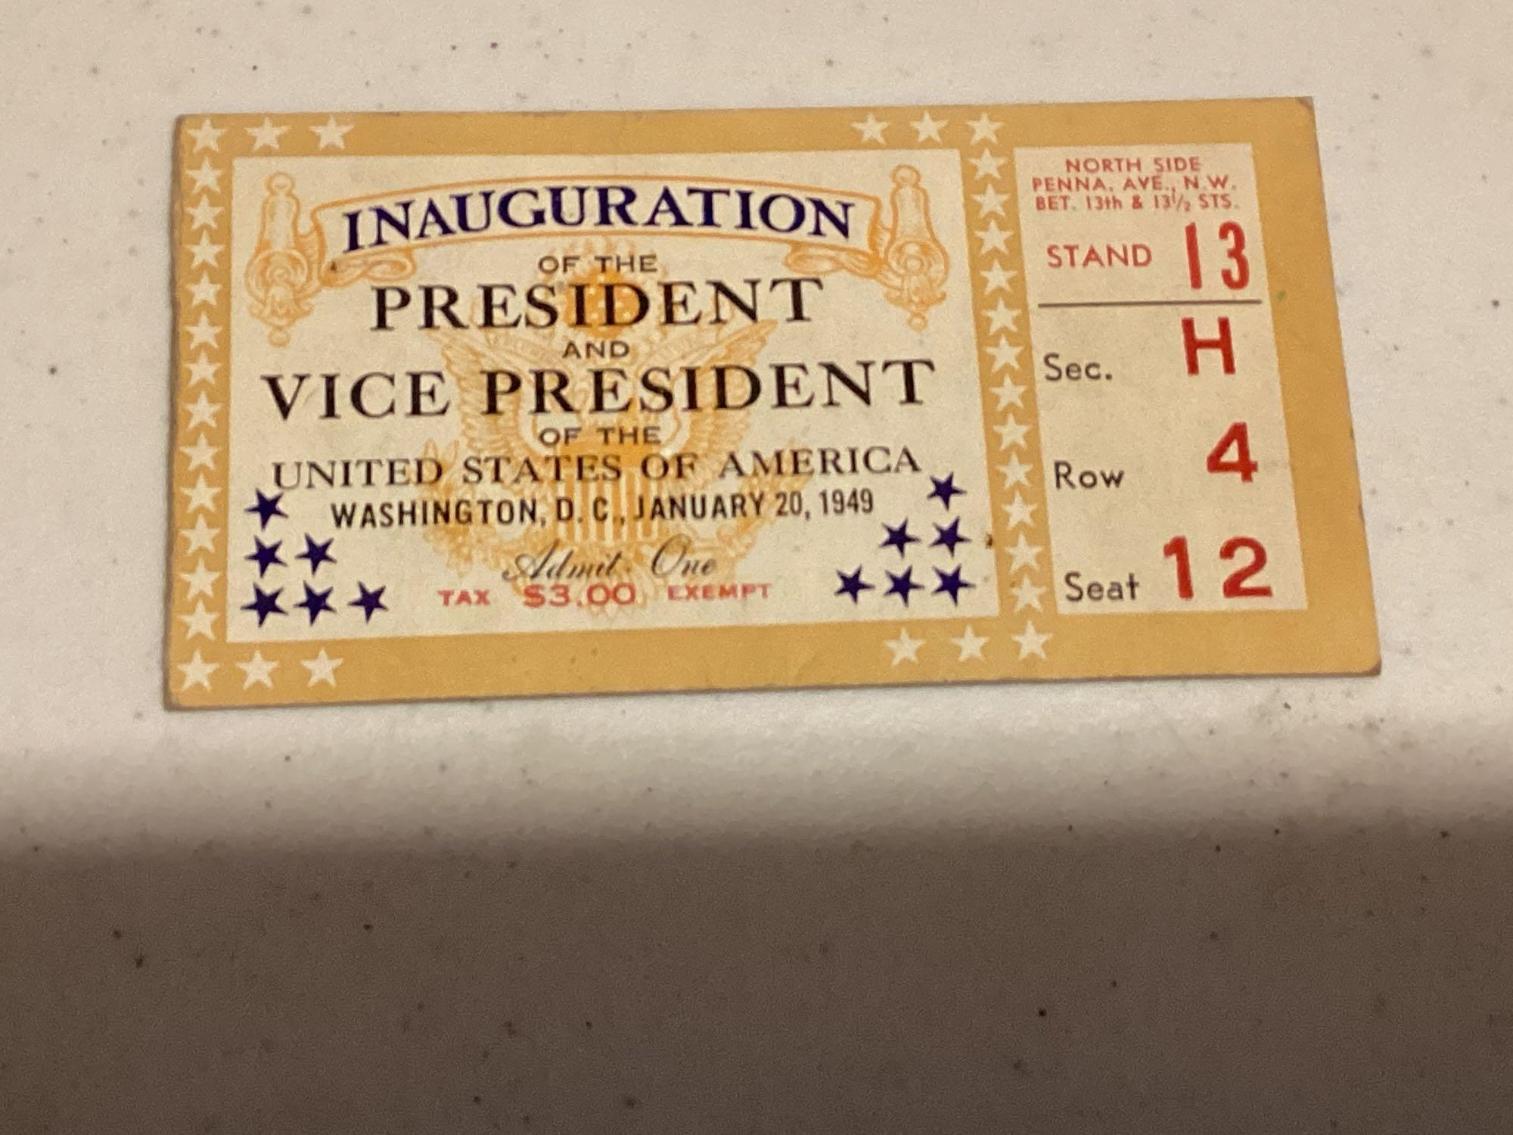 Image for 1949 Presidential Inauguration Ticket - Harry S. Truman